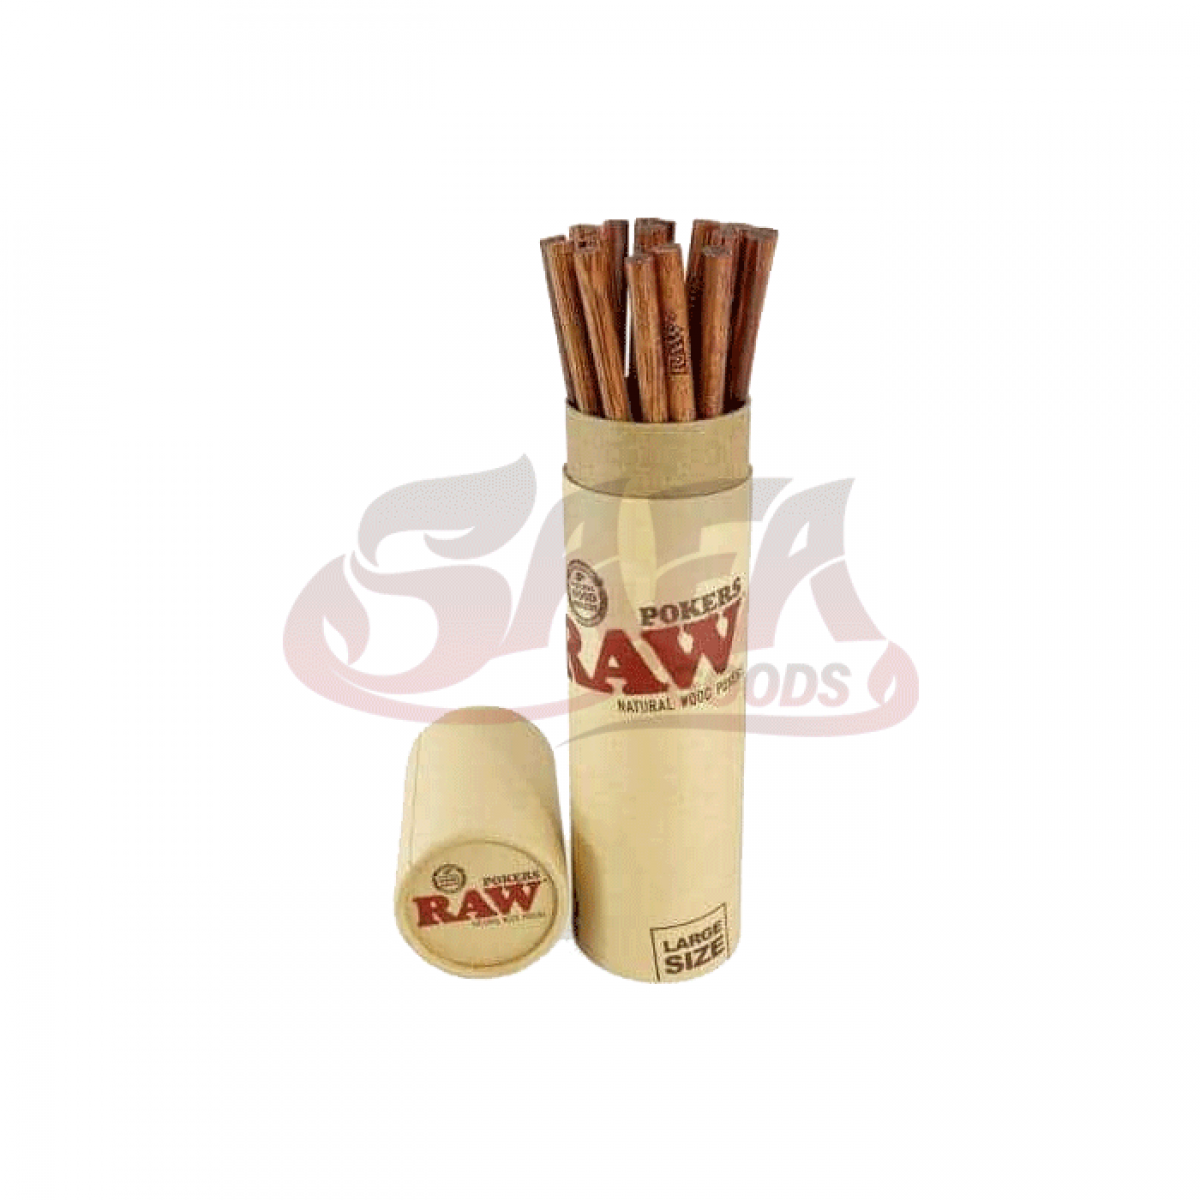 RAW Large Wooden Pokers 20PC